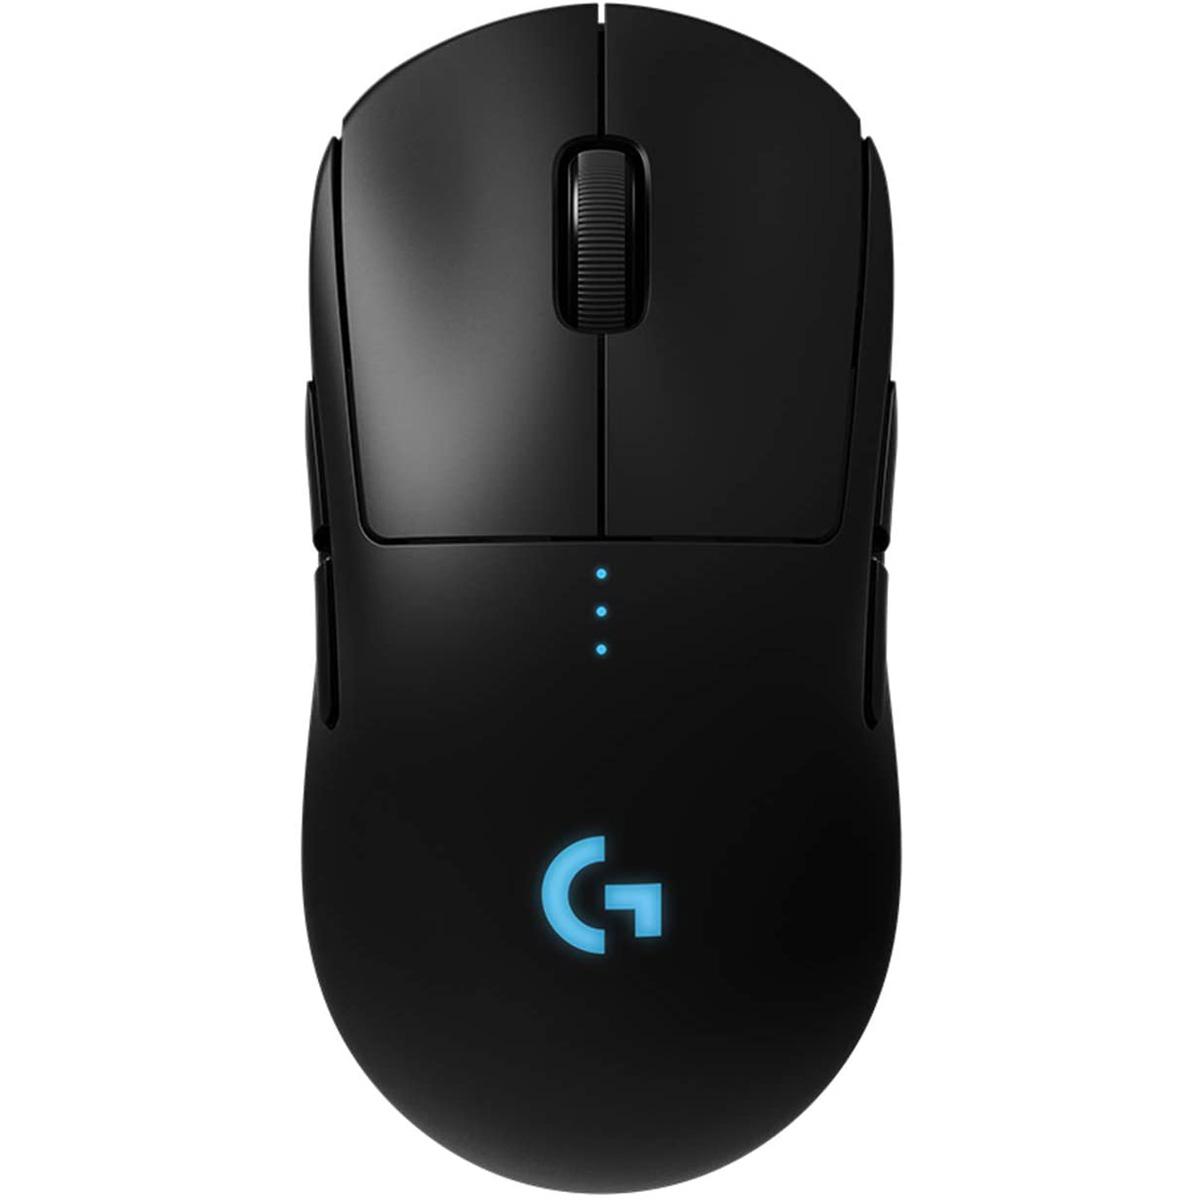 Logitech G Pro Wireless Gaming Mouse for $84.99 Shipped